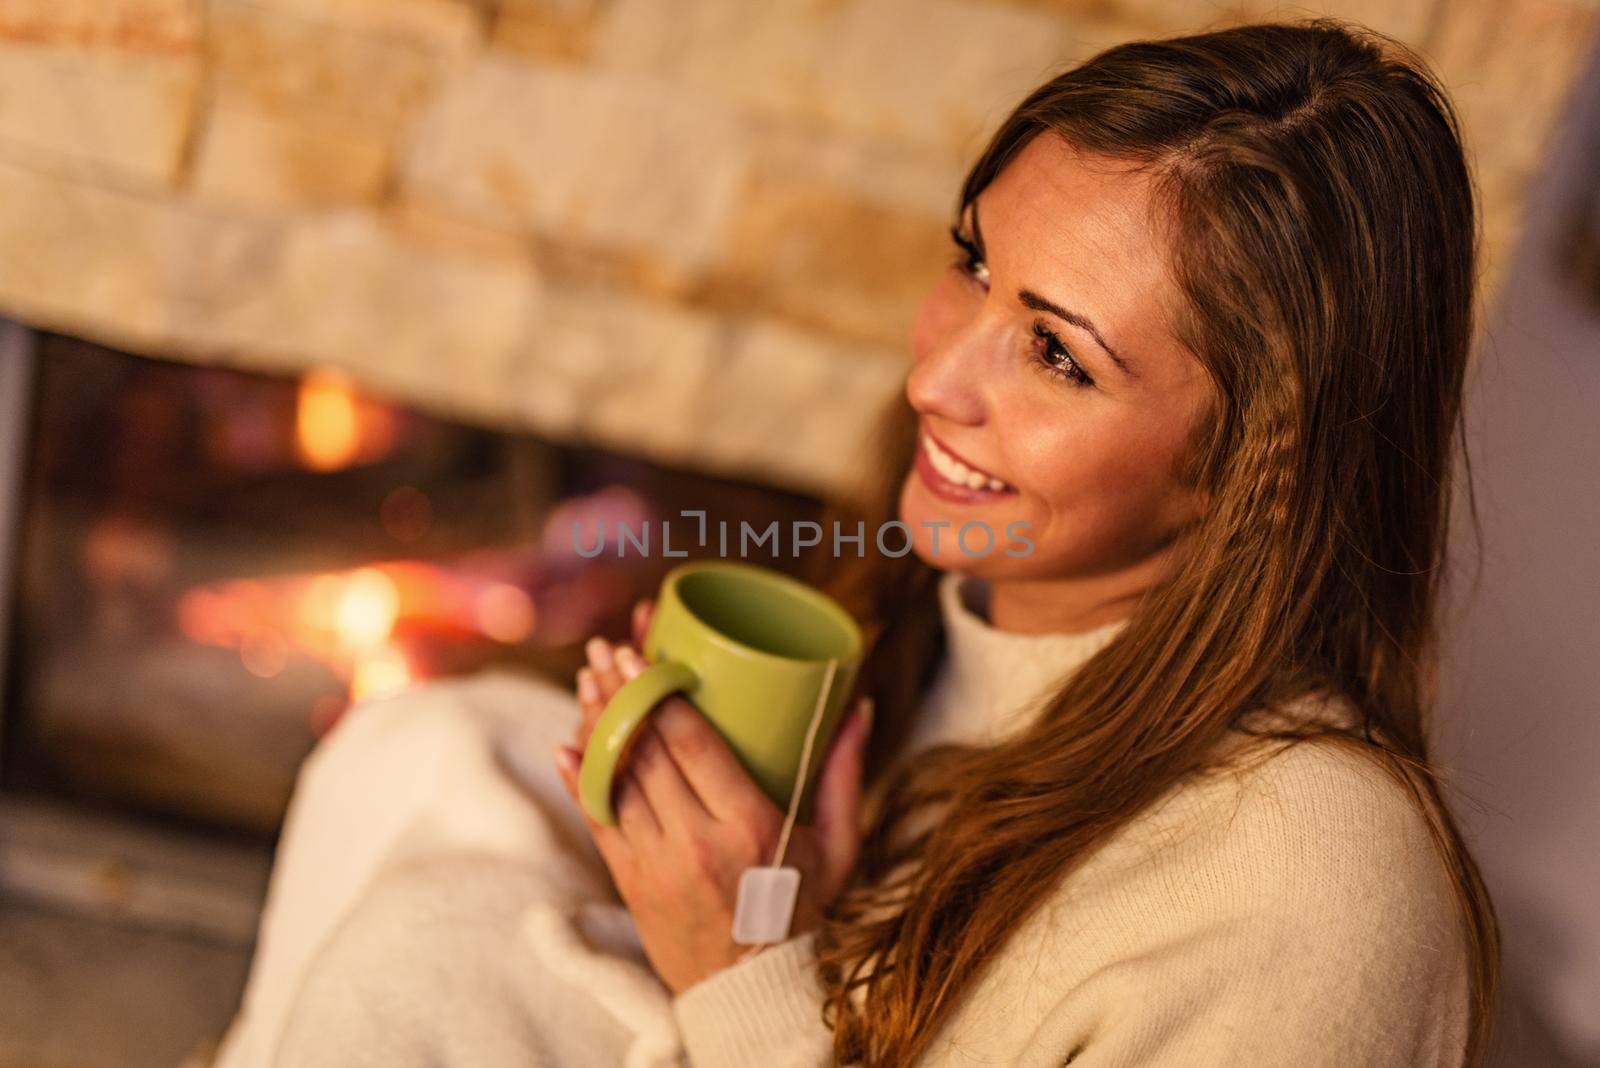 Beautiful young smiling woman enjoying a cup of tea by the fireplace.